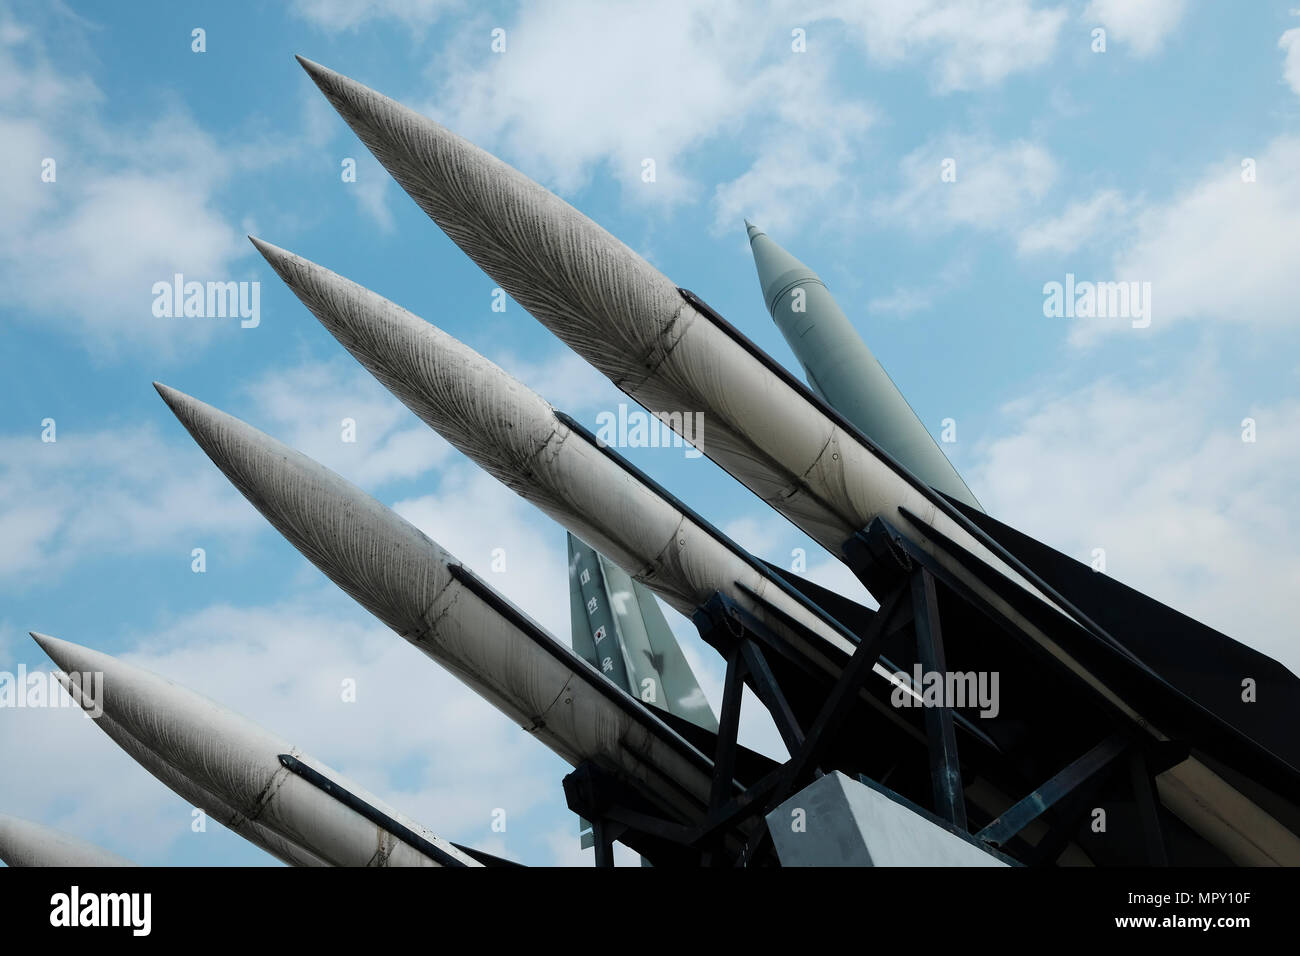 Replicas of a North Korean Scud-B missile and South Korean Nike missiles displayed at the War Memorial of Korea museum located in Yongsan-gu district on the former site of the army headquarters to exhibit and memorialize the military history of Korea in the city of Seoul capital of South Korea Stock Photo